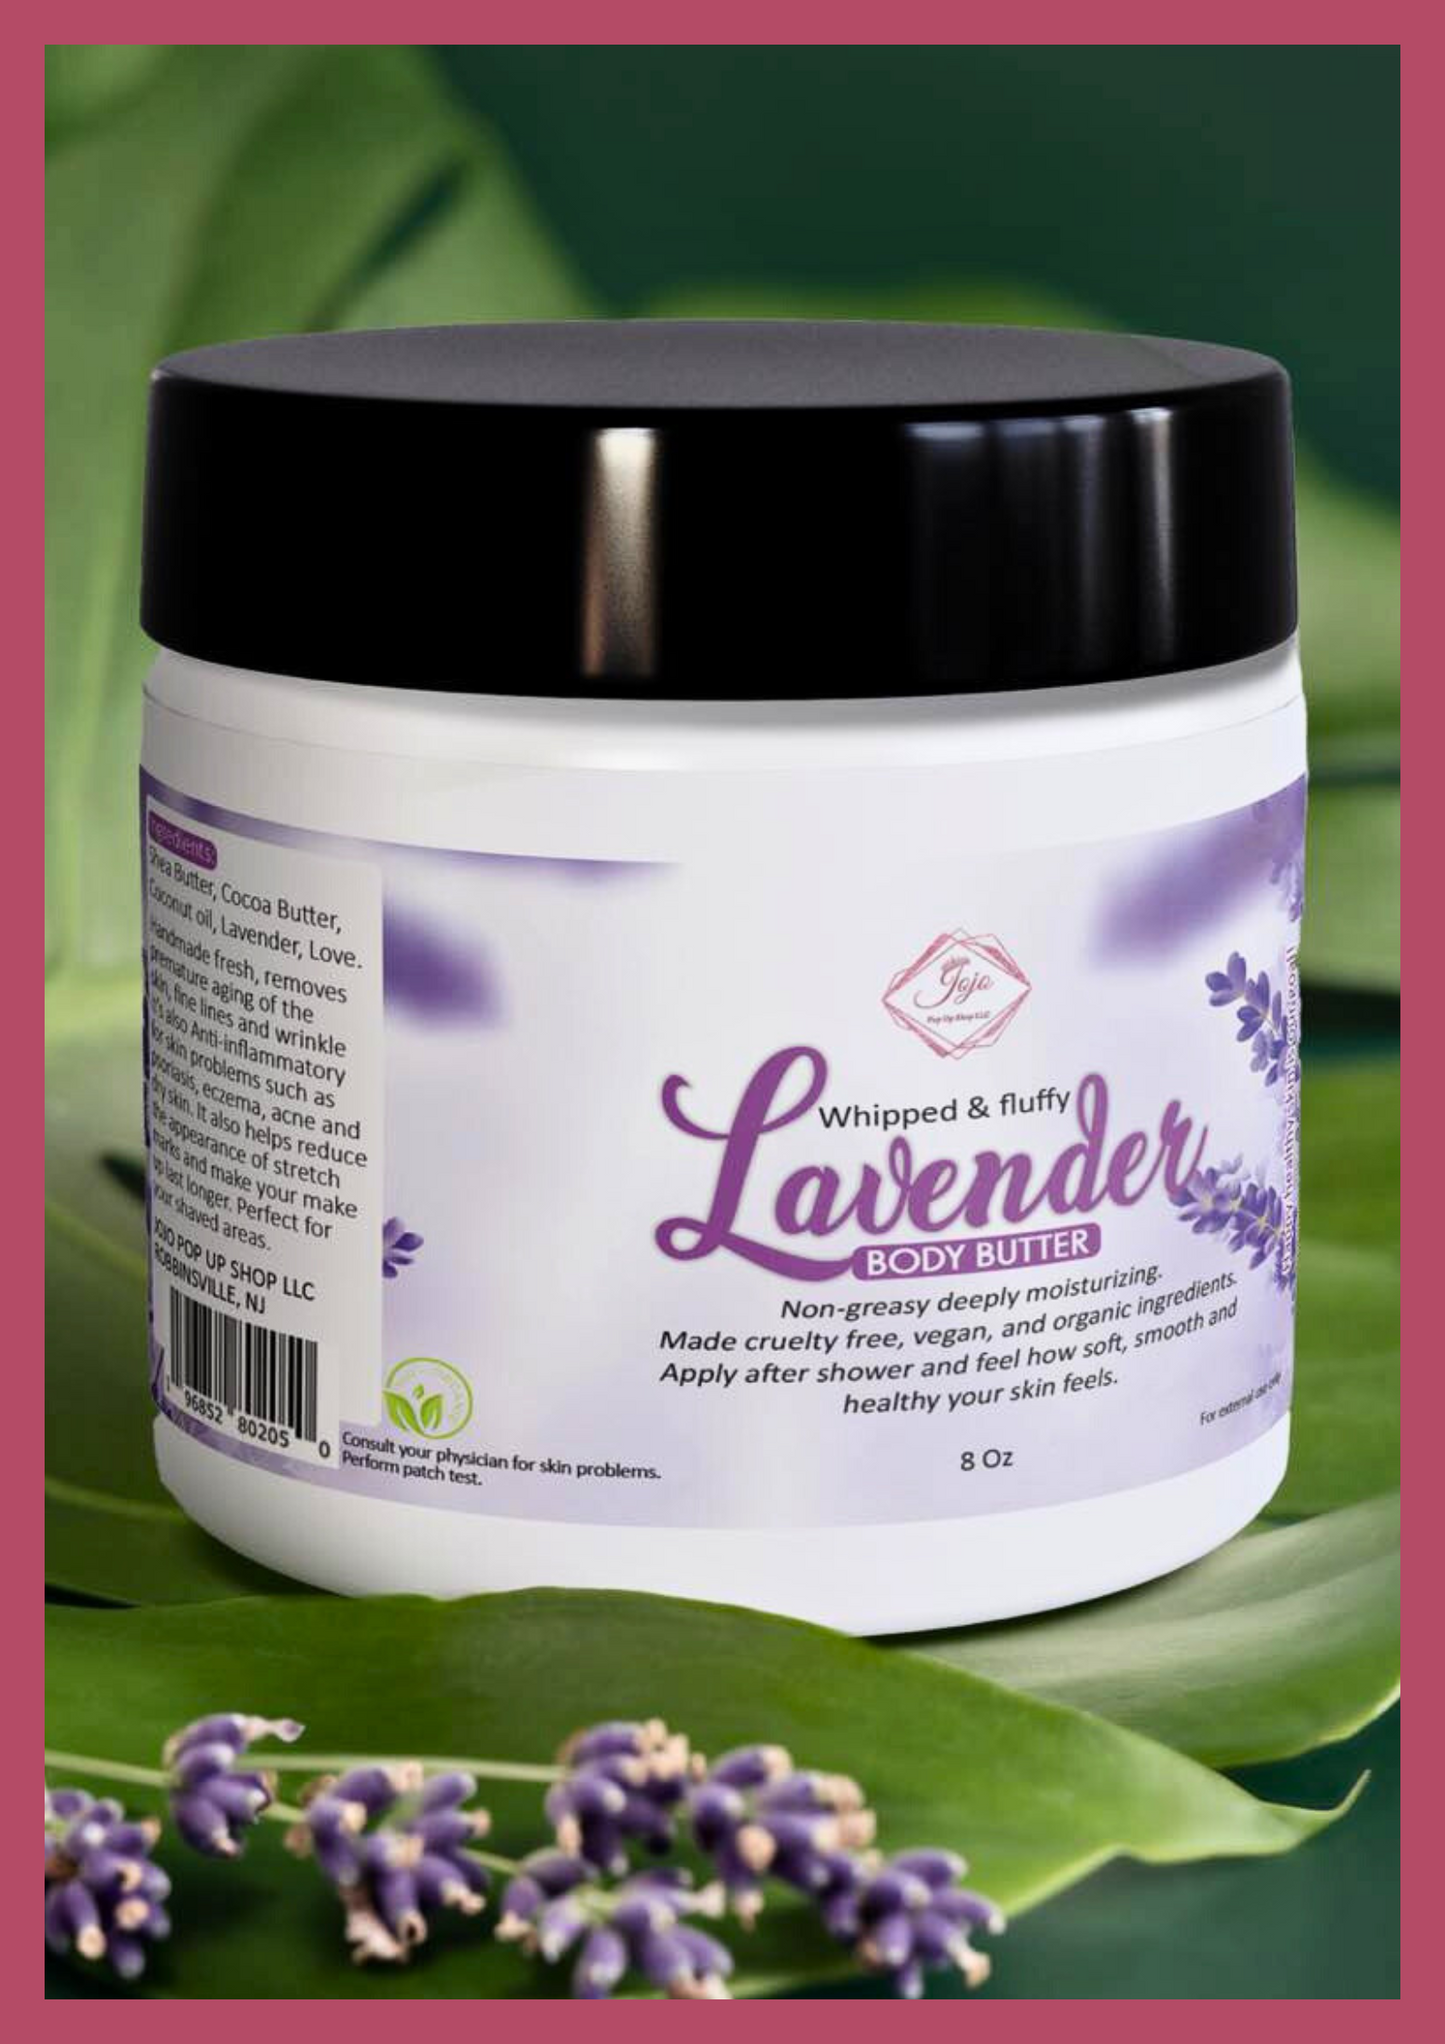 Whipped and Fluffy Lavender Body Butter